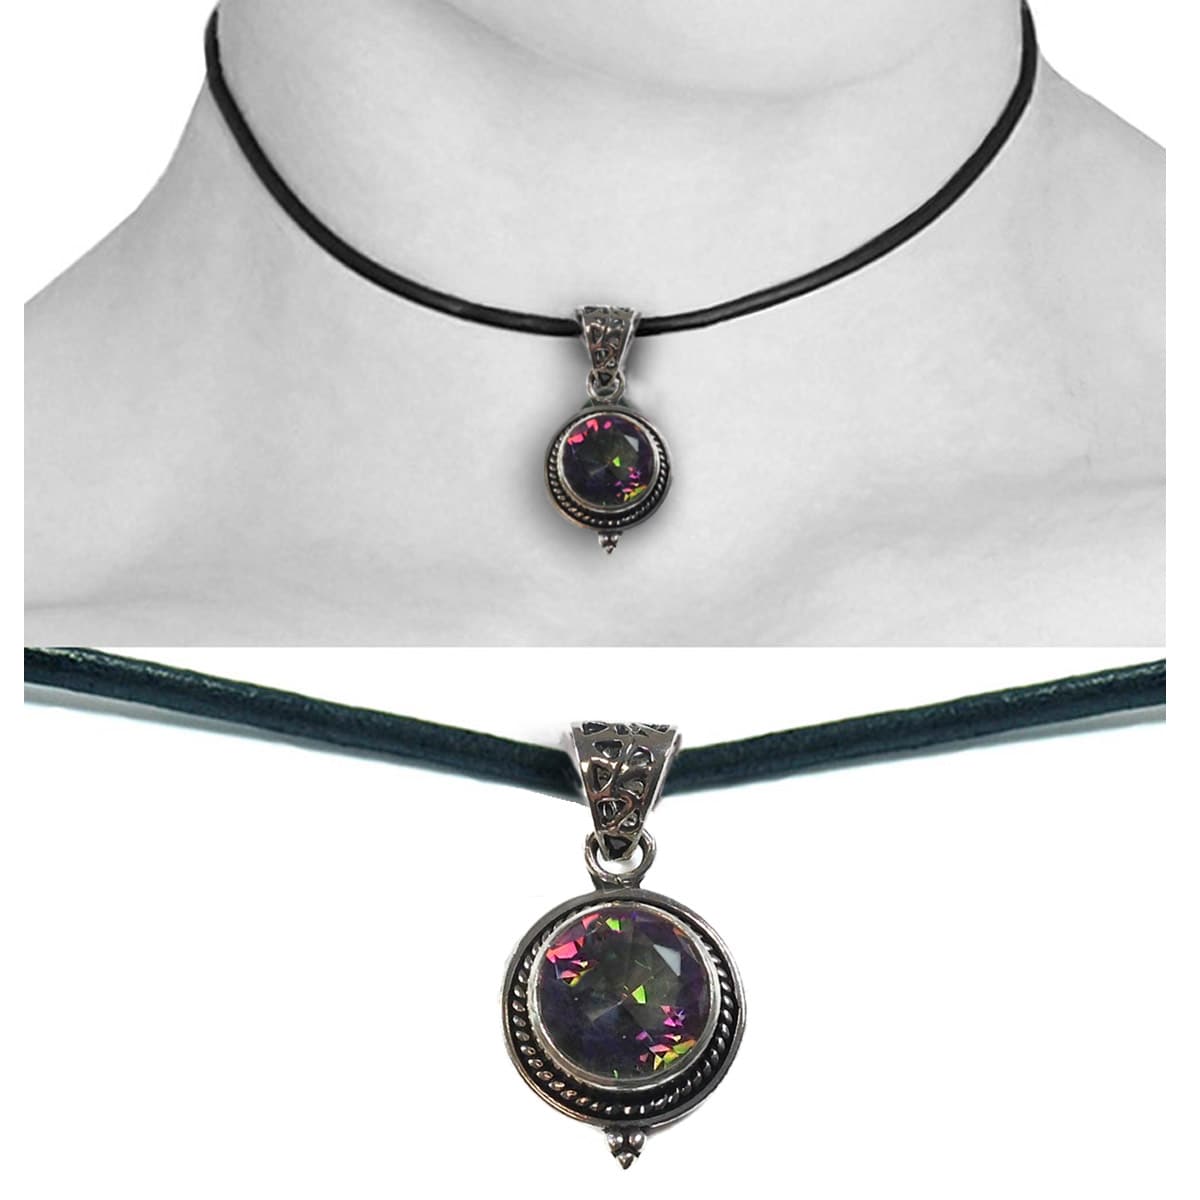 Quirky goth necklace, black velvet choker necklace with charm - Ruby Lane